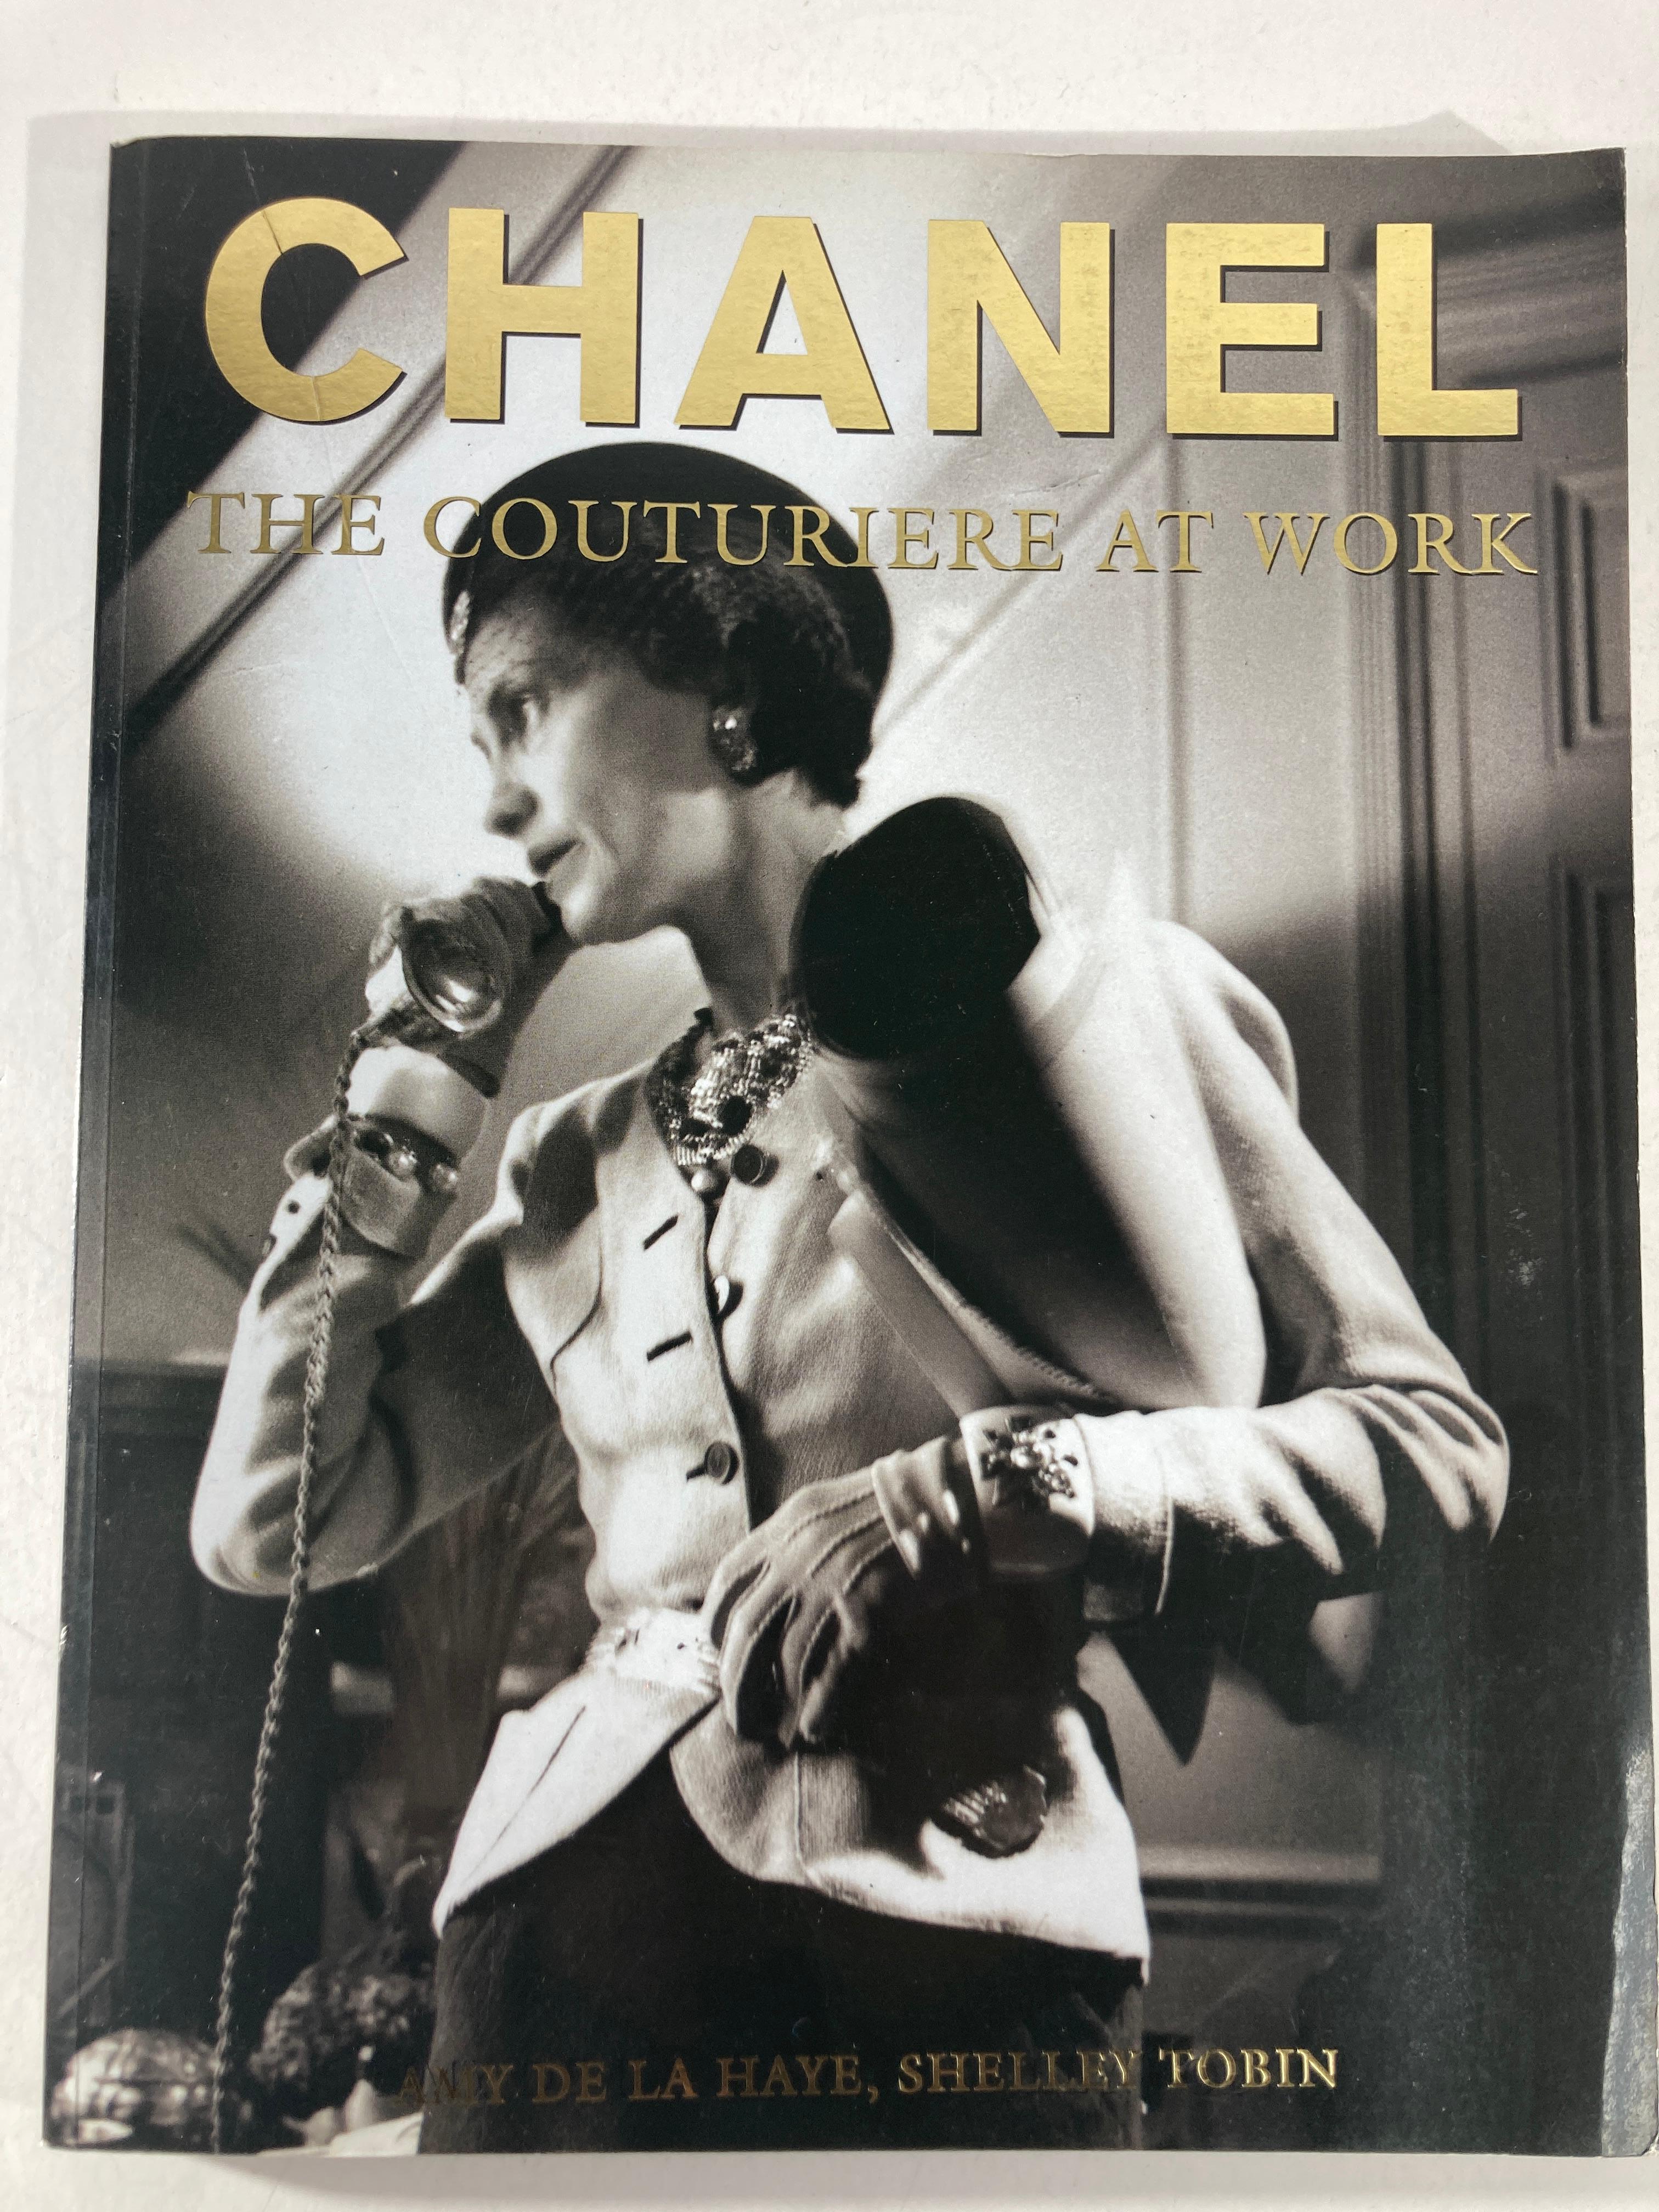 Chanel: The Couturiere at Work by Amy De la Haye, Shelley Tobin.
Published by Woodstock, N. Y. The Overlook Press, 1994
Victoria & Albert Museum, 1996 - Costume design - 136 pages.
'Fashion is not something that exists in dresses only; fashion is